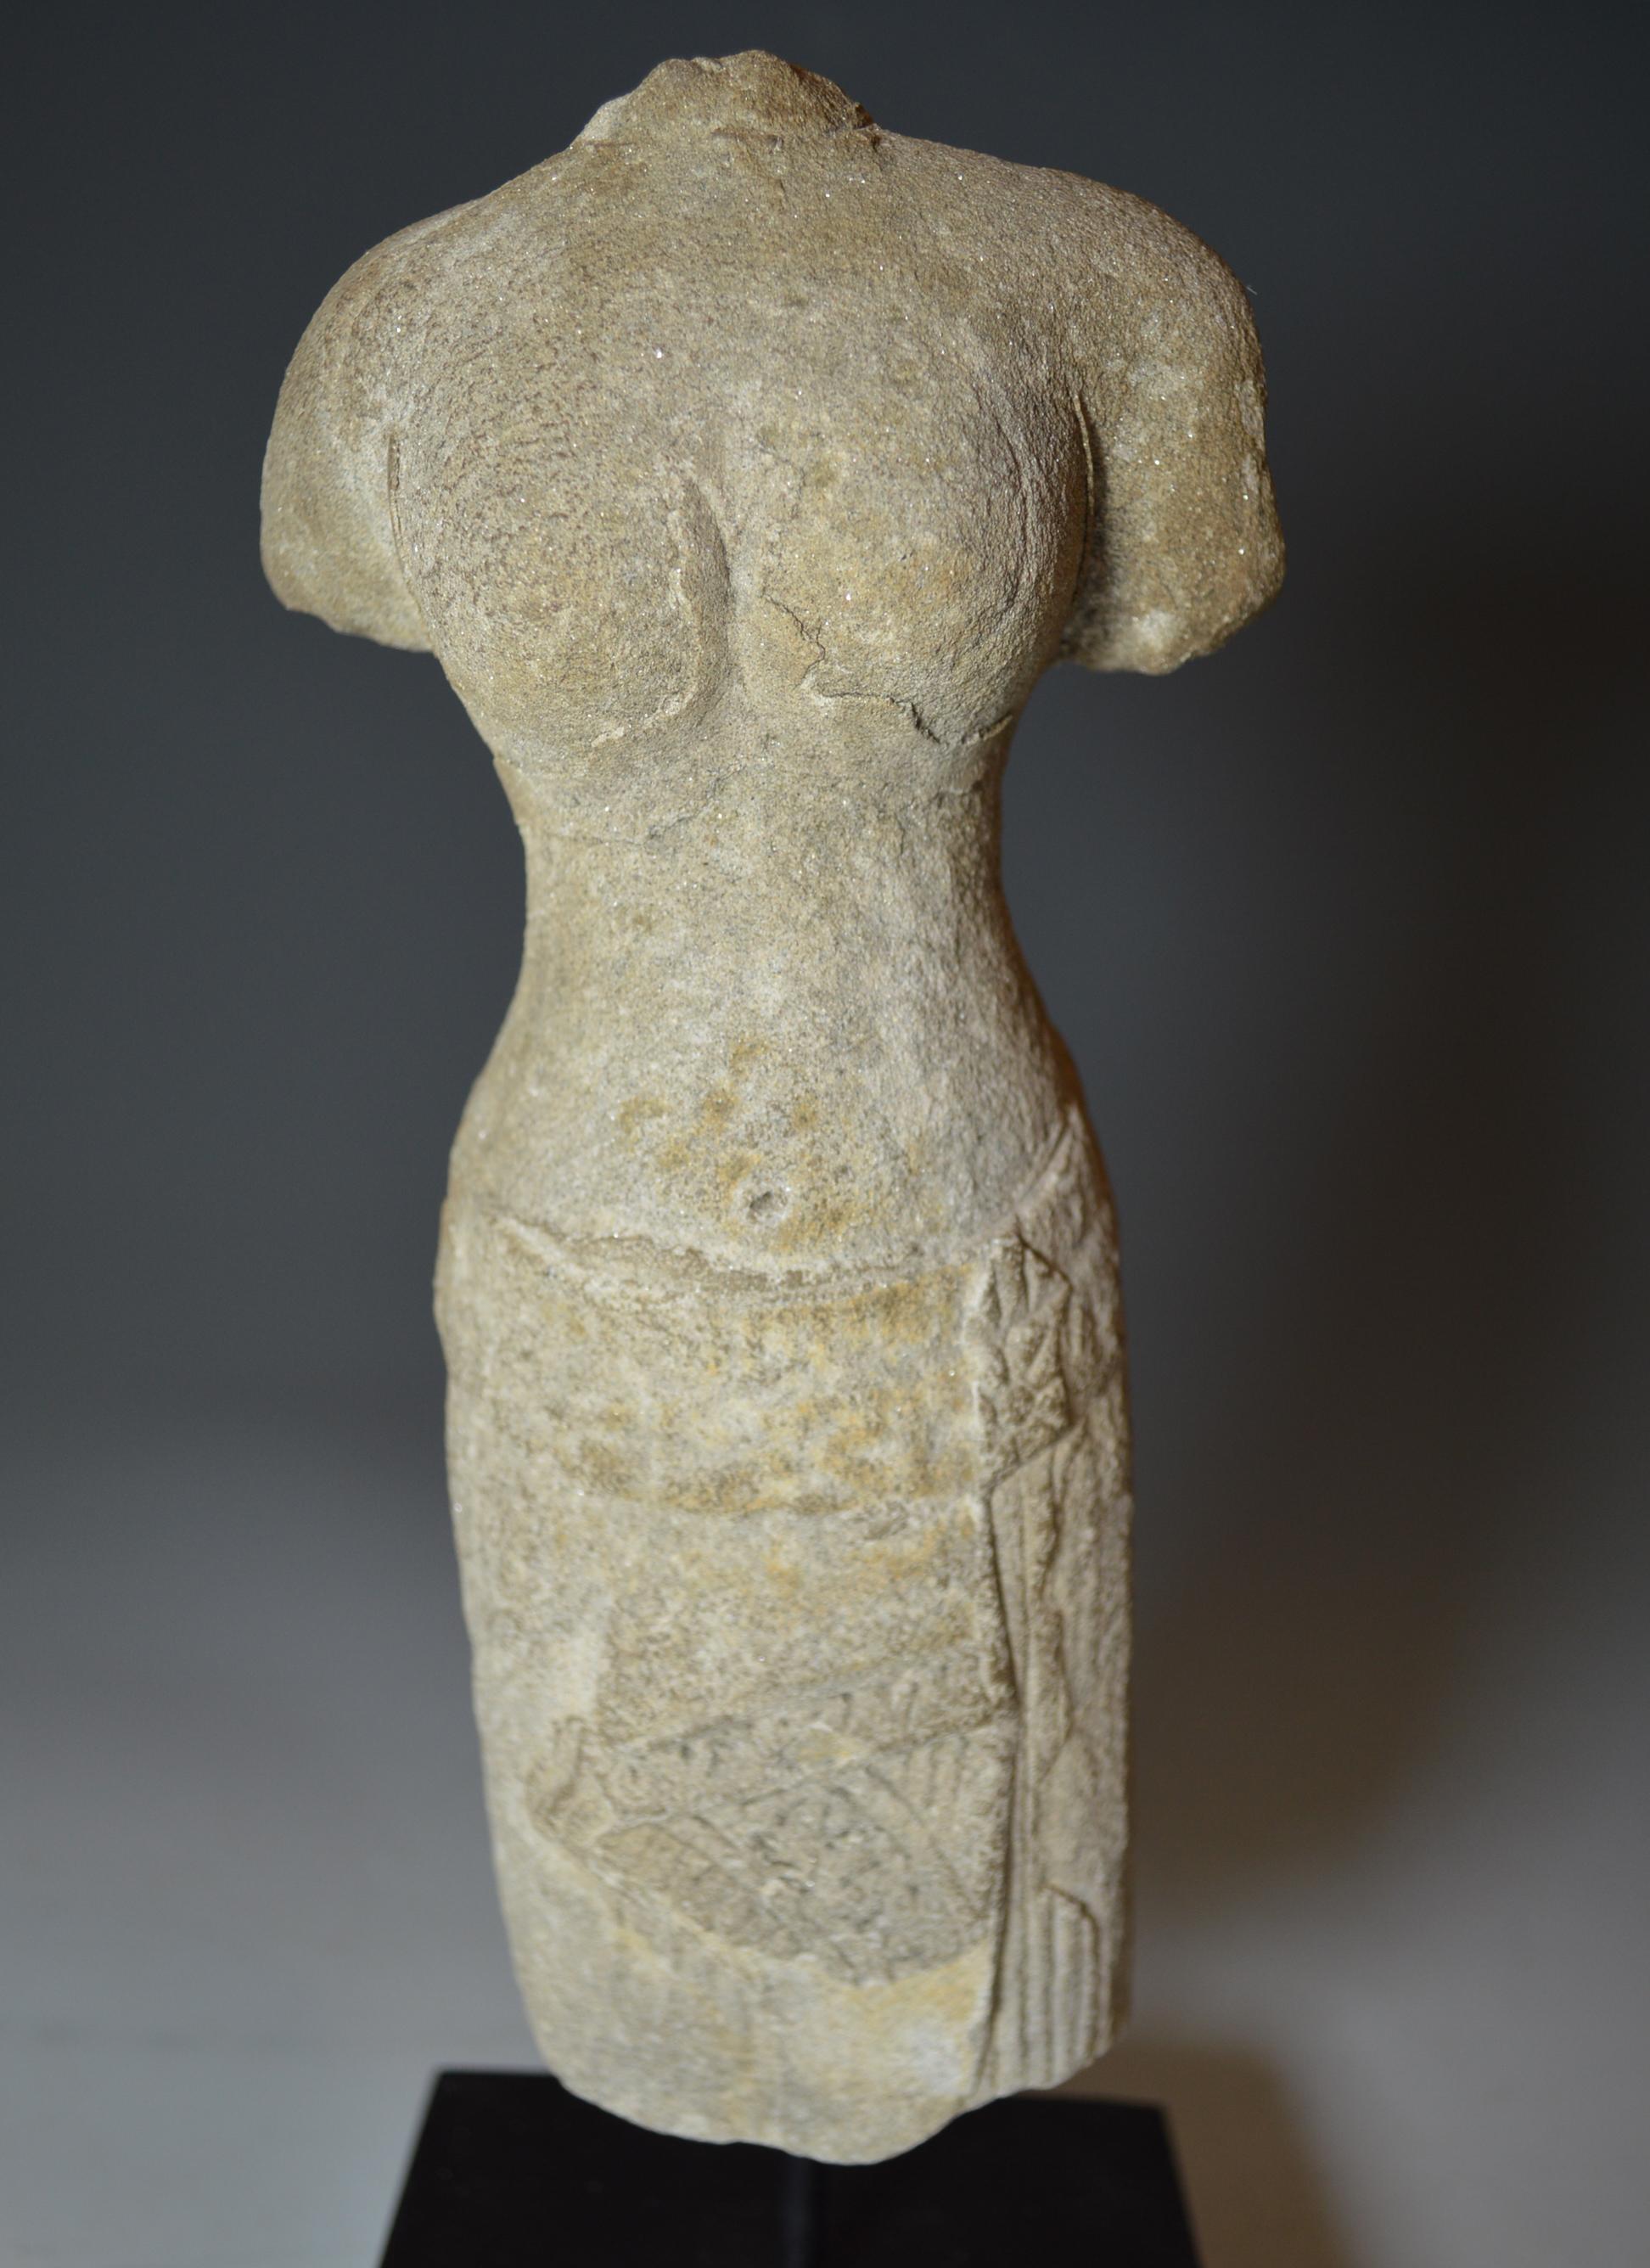 A elegant Khmer female standing figure with rounded shoulders and breasts in Samapada position wearing pleated sarong This is a Angkor Period figure depicting the goddess Uma (Parvati), the consort of Shiva and Hindu goddess of fertility, in the